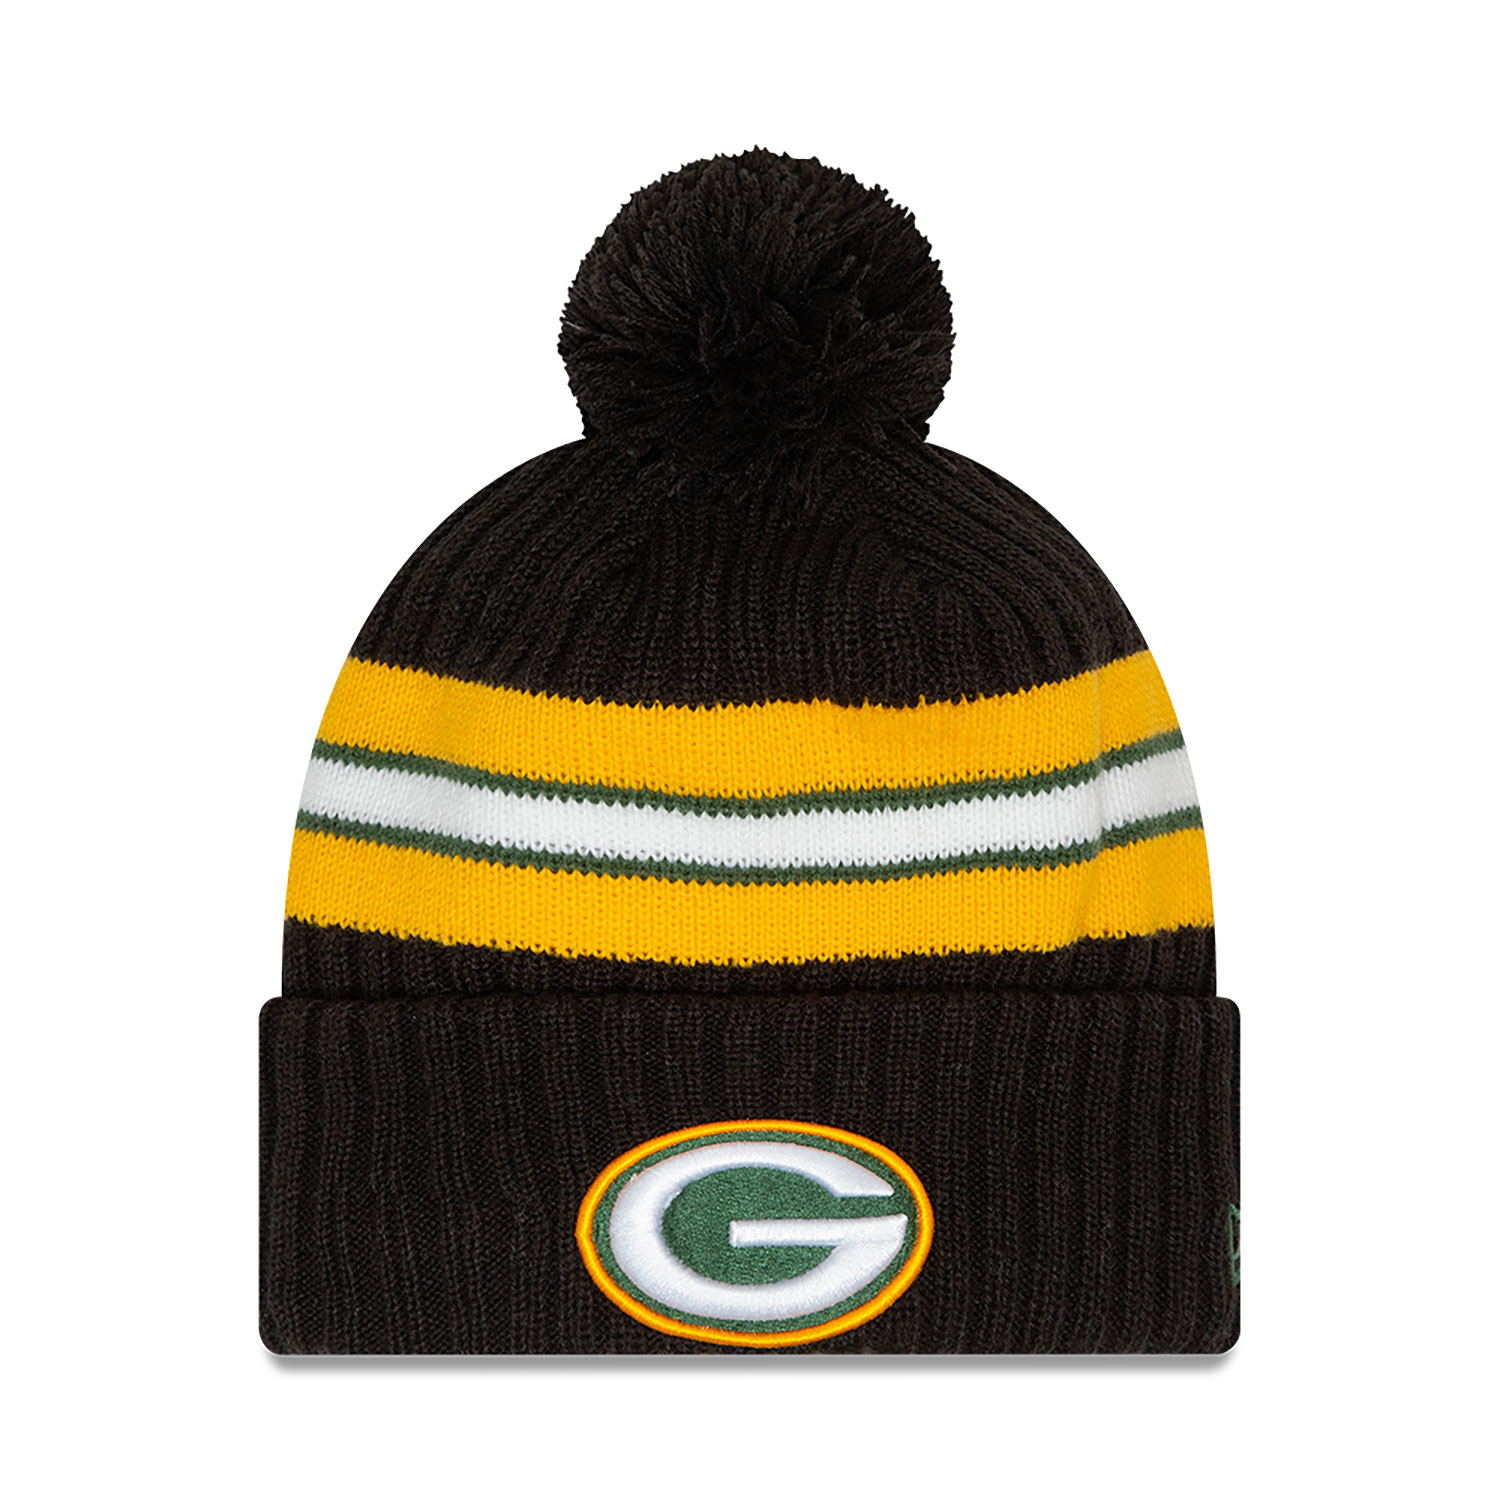 NFL Sideline 2023 Green Bay Packers Cuff Knit Beanie Hat D03_520